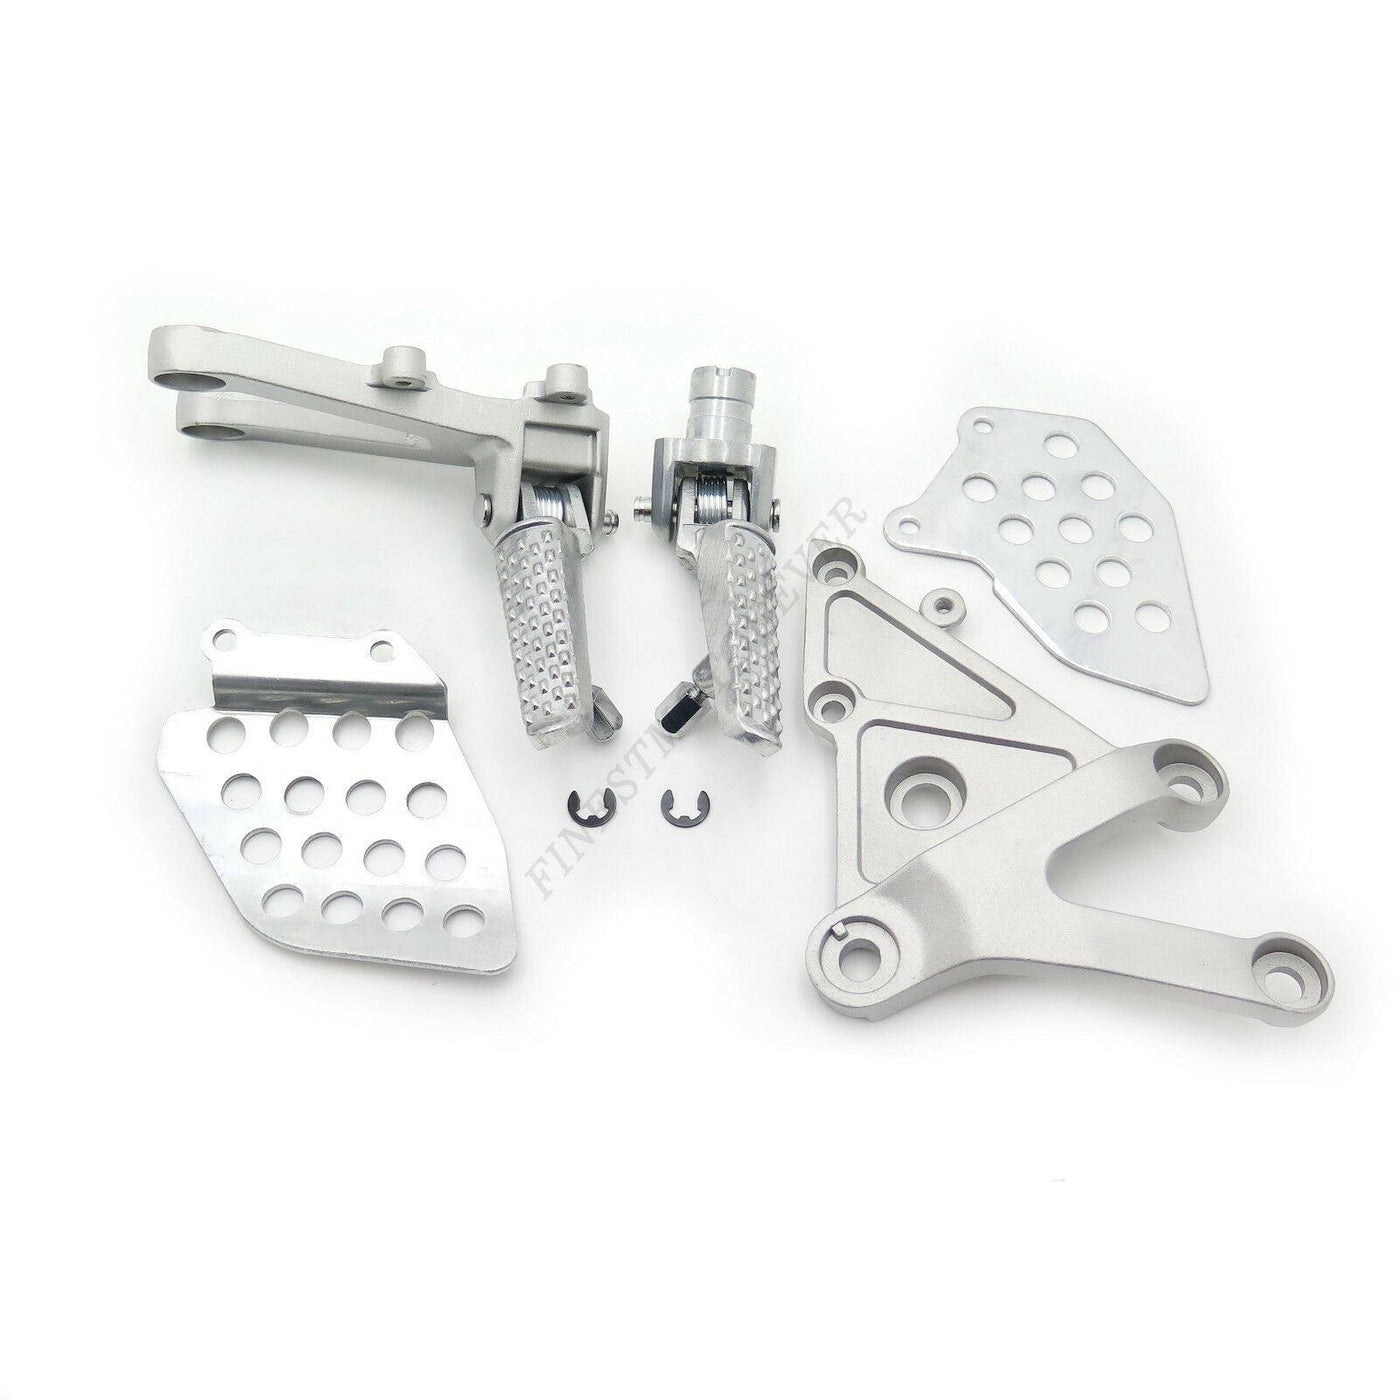 Silver Front Rider Foot Pegs Bracket Fit For Honda Cbr600Rr 2003 2004 2005 2006 - Moto Life Products